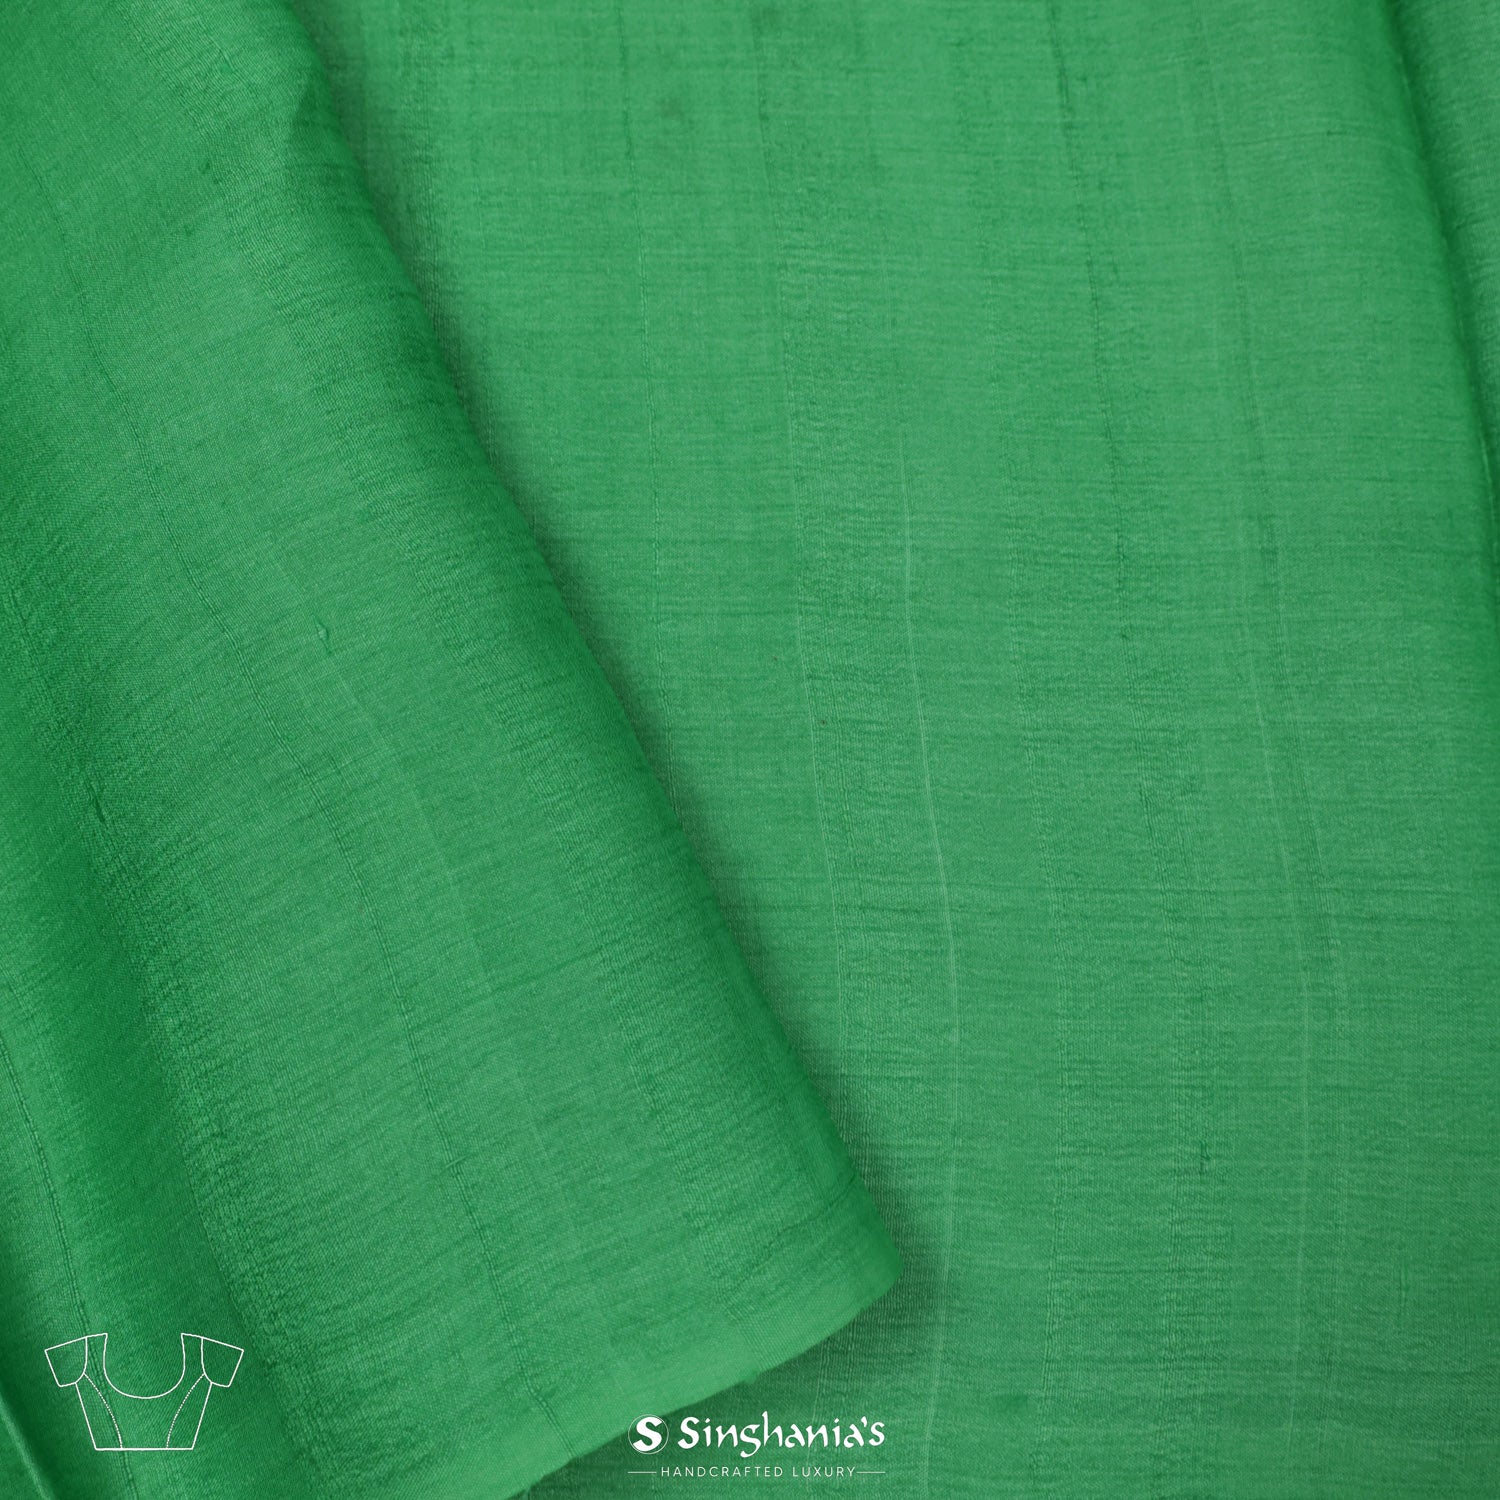 Emerald Green Printed Tussar Saree With Floral Pattern